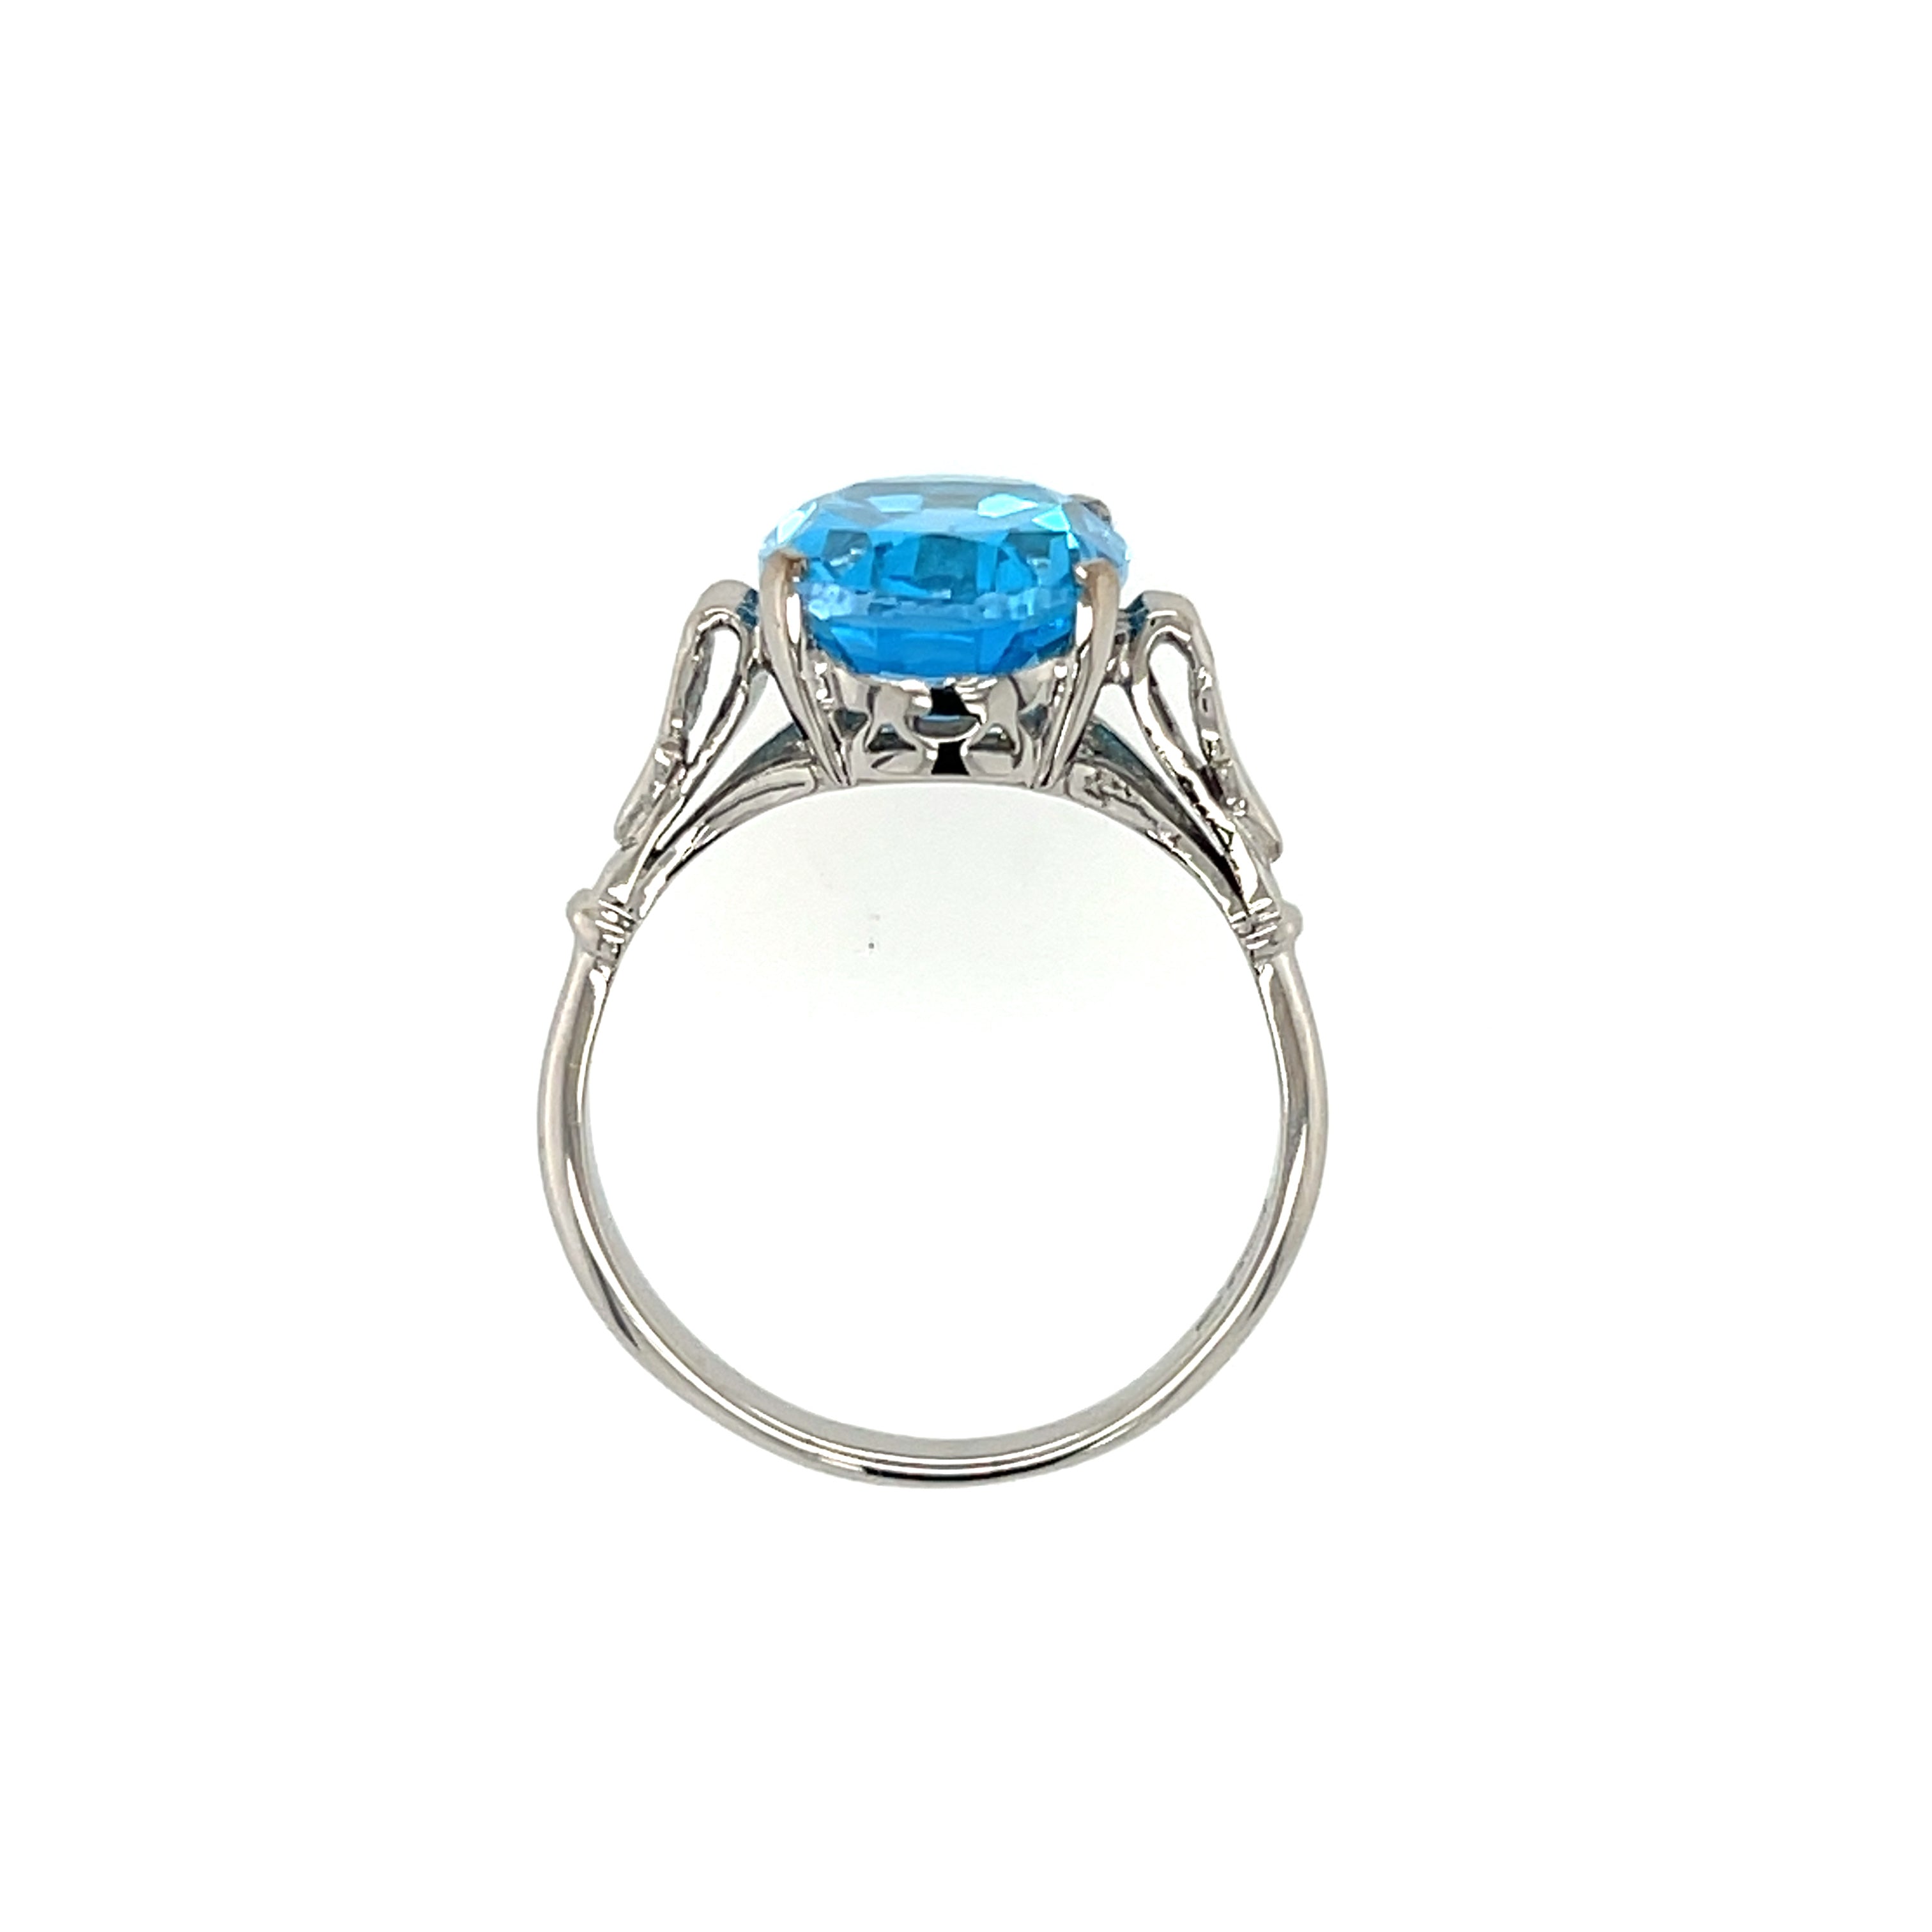 18ct White Gold 7.62ct Oval Blue Topaz Dress Ring